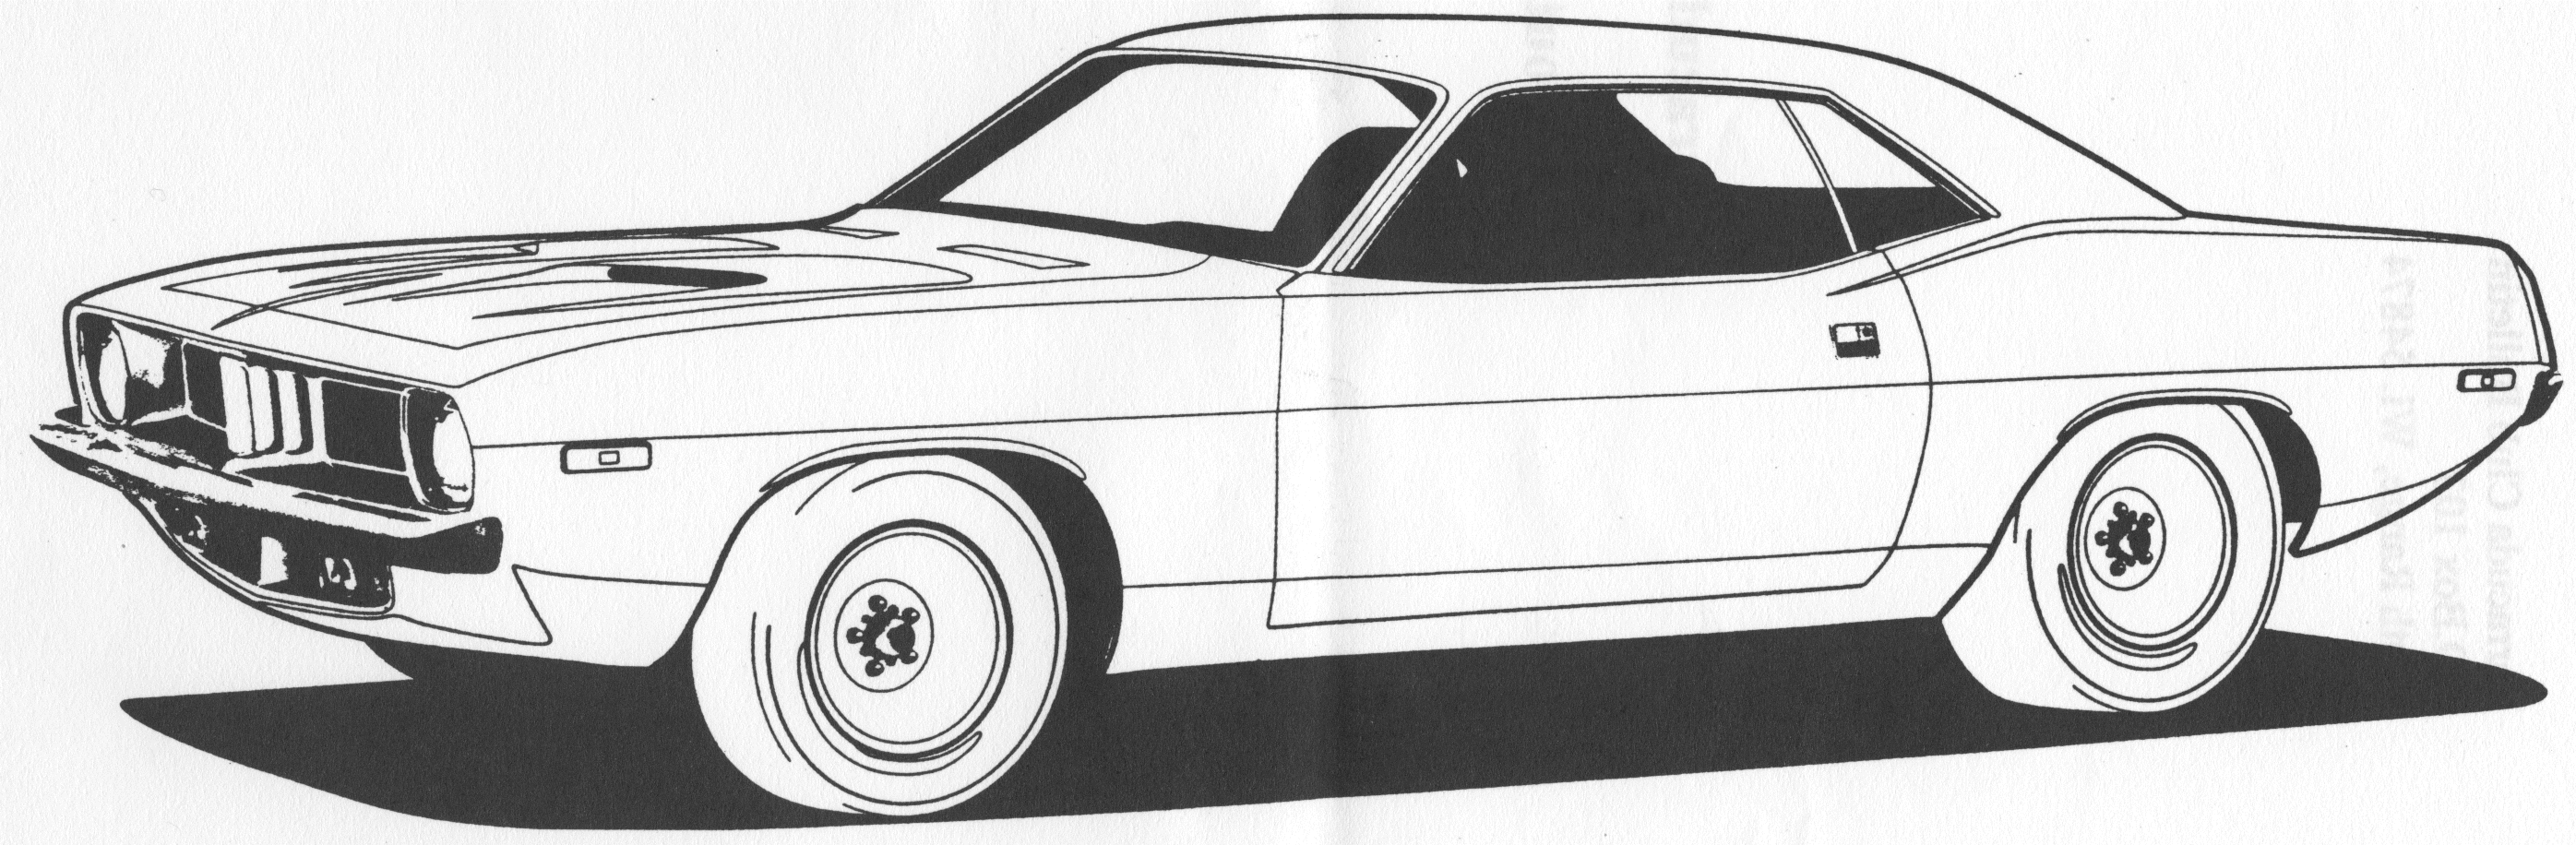 cars coloring sheet real cars coloring pages download and print for free cars coloring sheet 